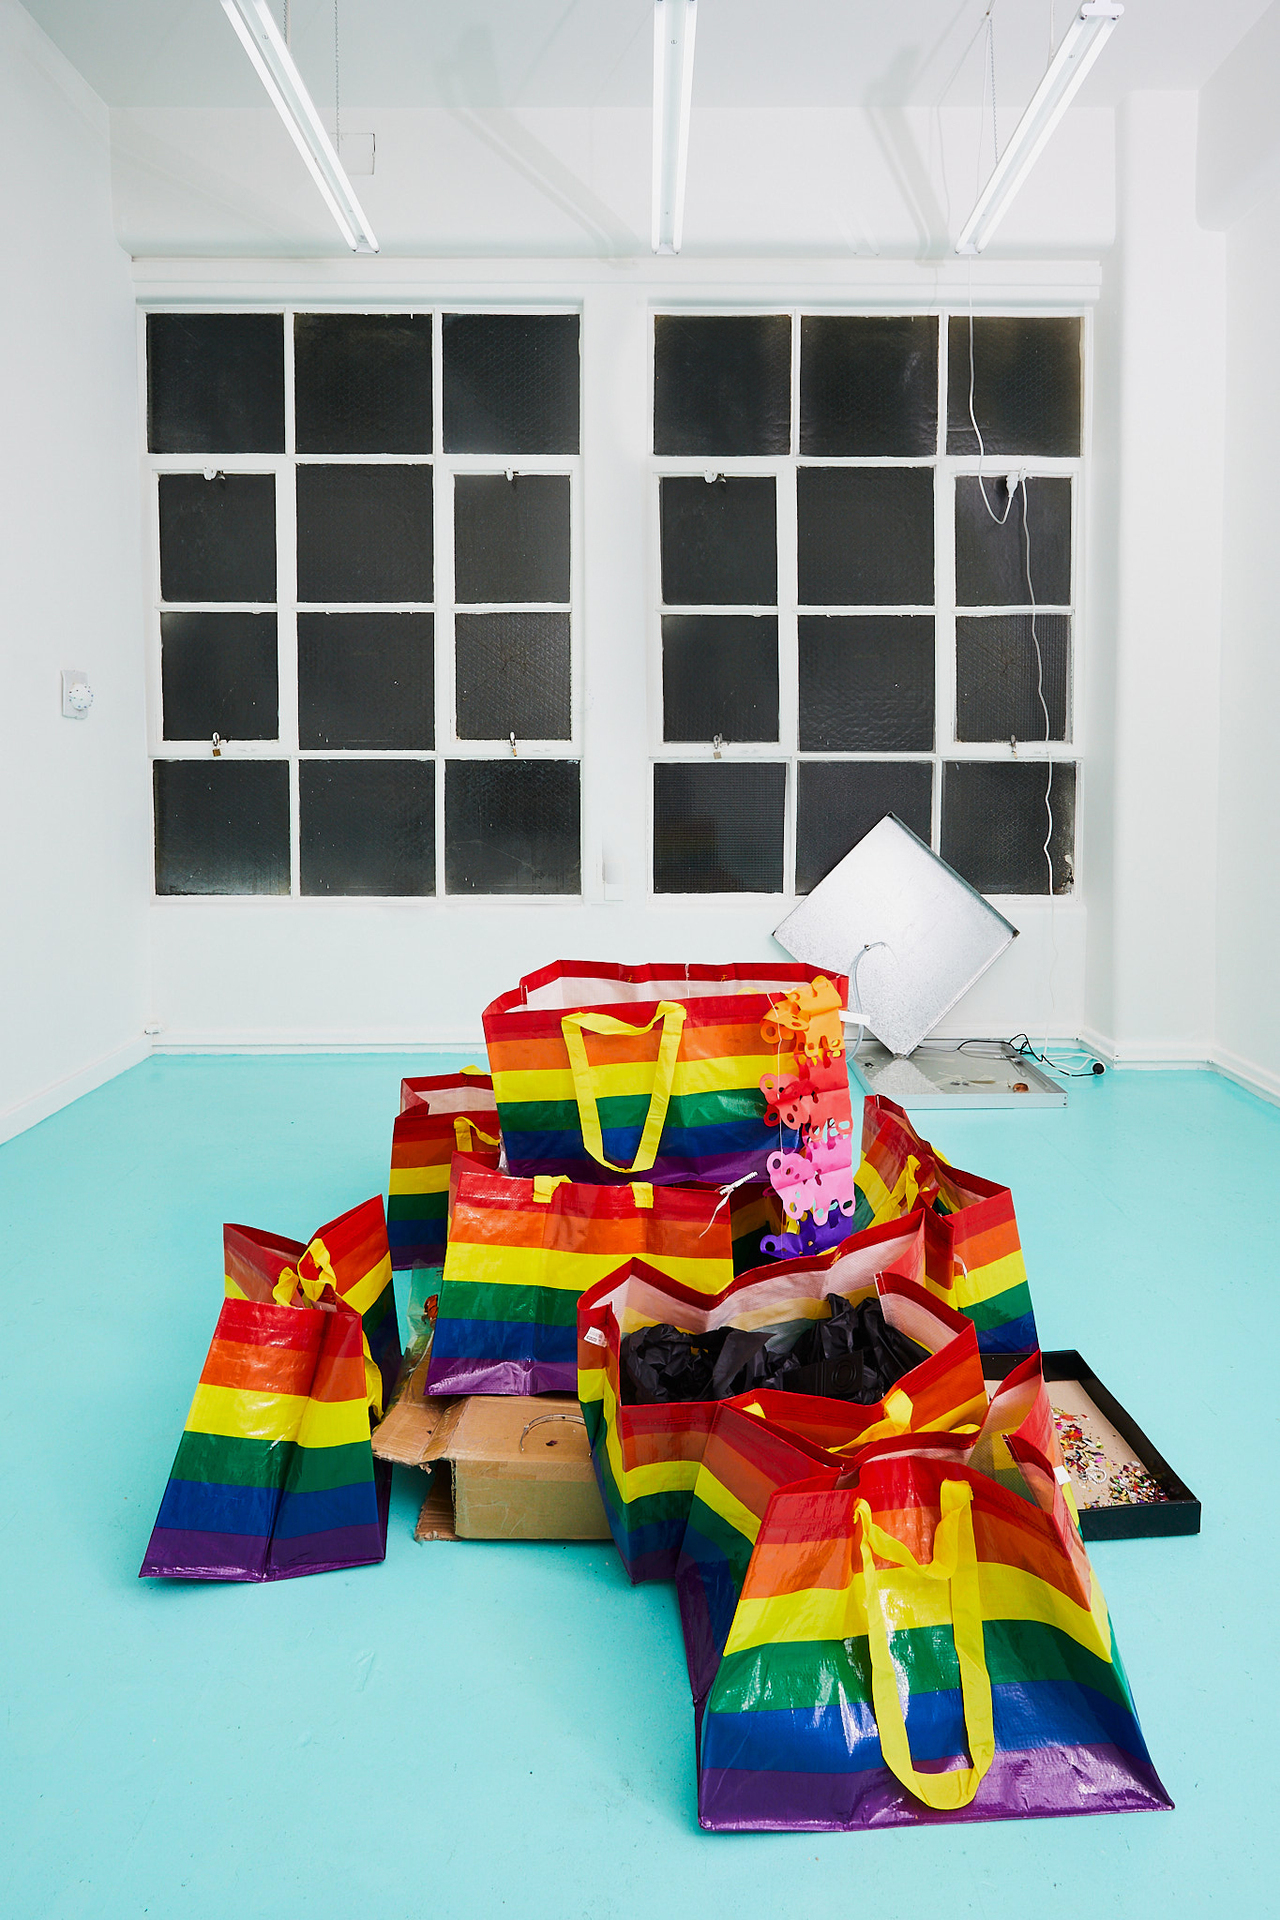 Spencer Lai Untitled, 2020 IKEA 'Storstomma' pride bags, cardboard, tissue paper, party supplies and decorations, fabricated weaponry, tools, antique puppets